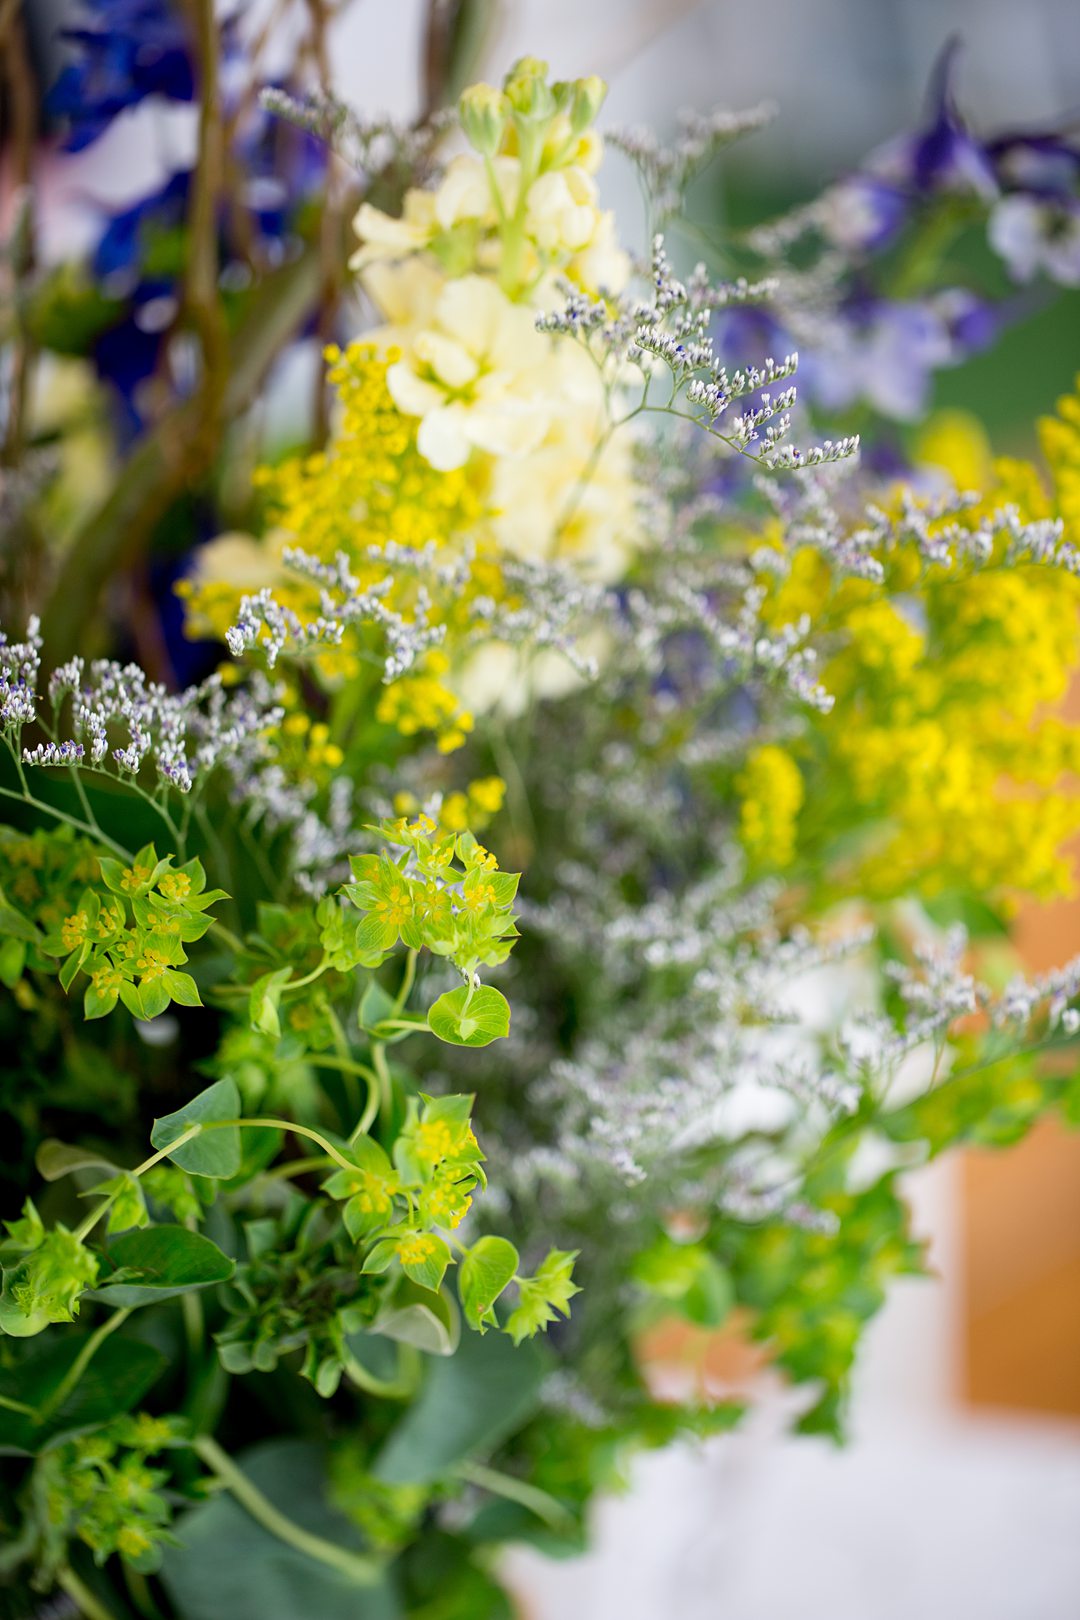 Wildflowers at the reception of a Club Getaway. The summer camp wedding was photographed by Mikkel Paige Photography.